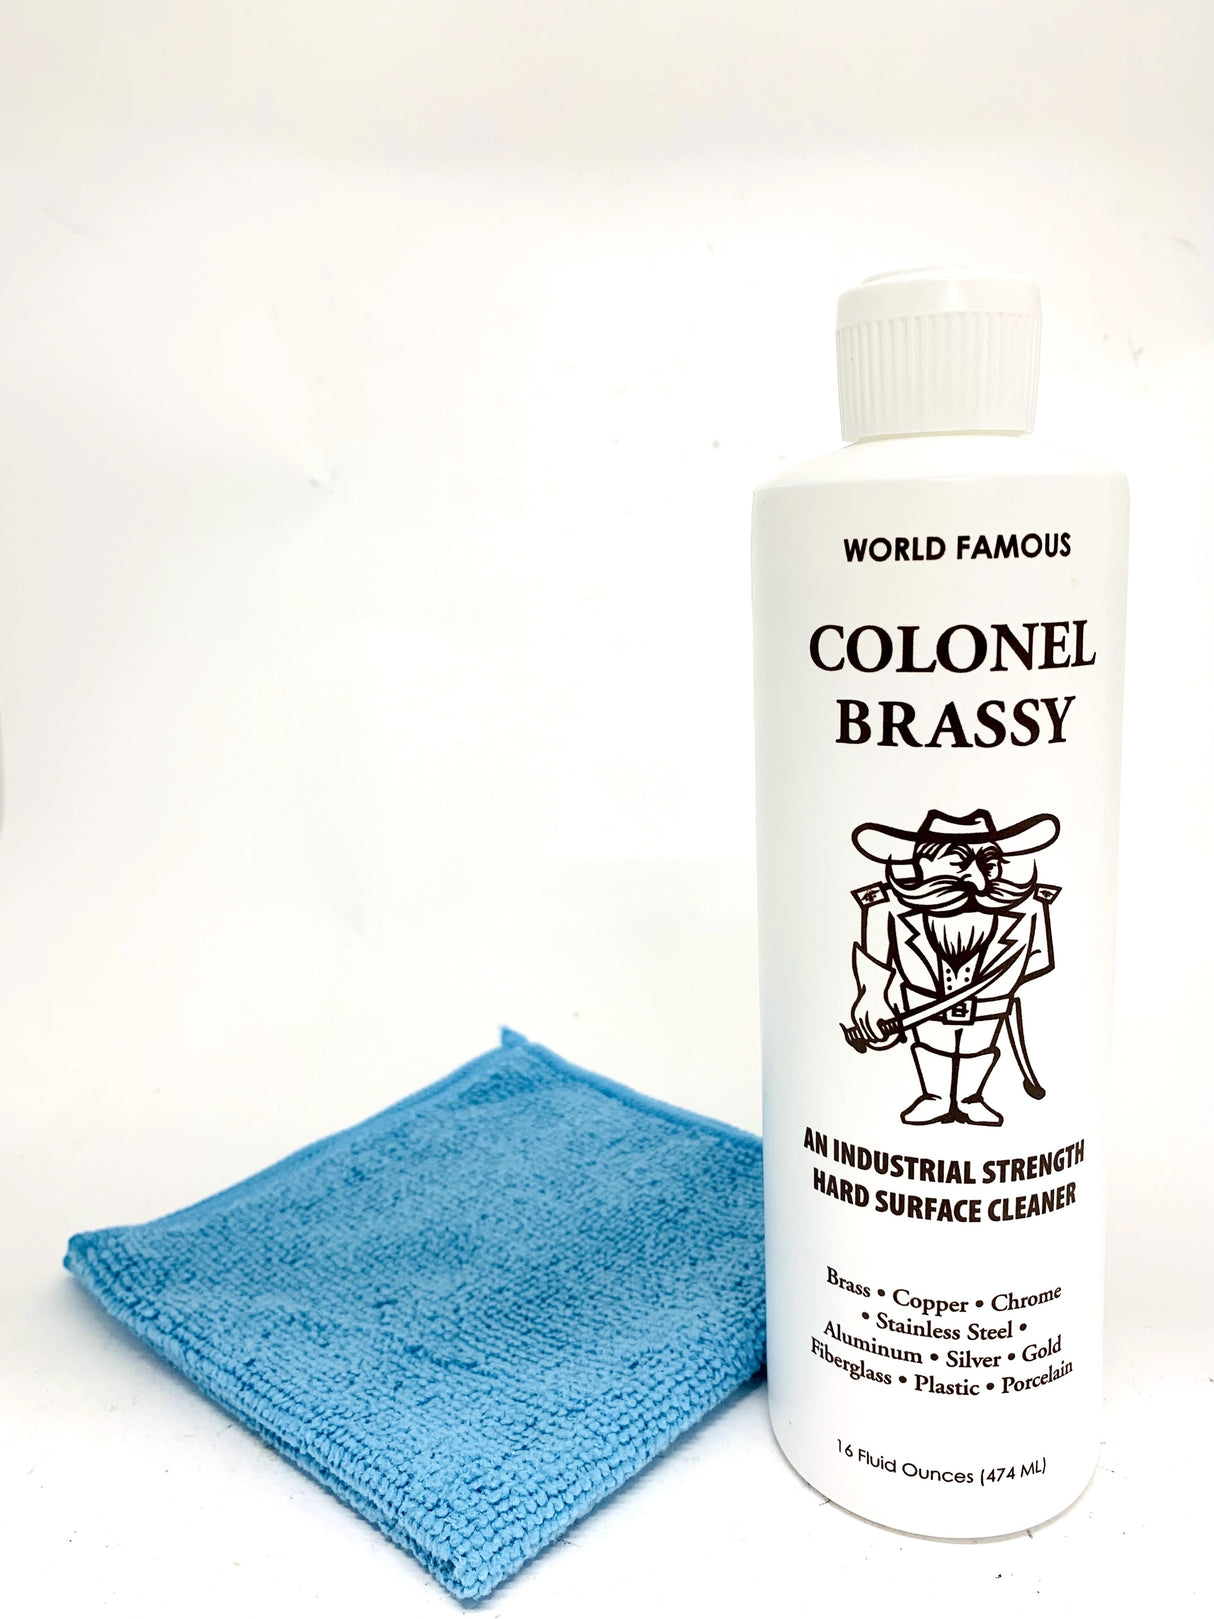 Colonel Brassy - Hard Surface Cleaner/Polish - 3 PACK 16oz + 3 microfiber cloth